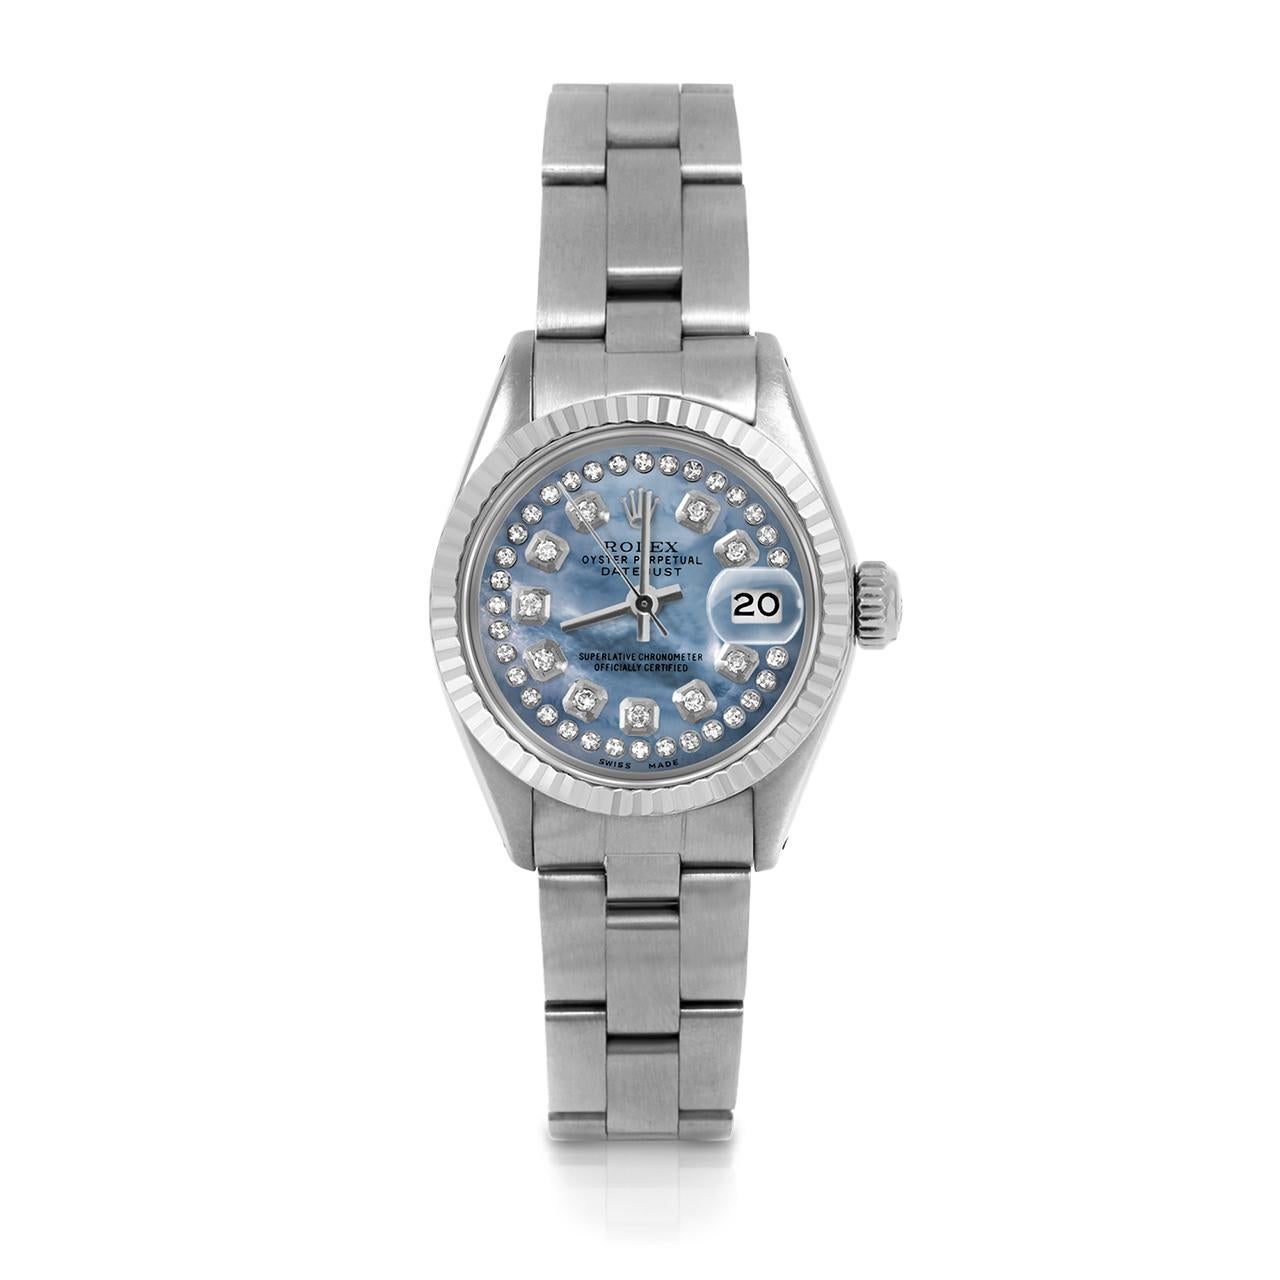 Pre-Owned Rolex 6917 Ladies 26mm Datejust Watch, Custom Blue Mother of Pearl String Diamond Dial & Fluted Bezel on Rolex Stainless Steel Oyster Band.   

SKU 6917-SS-BLMOP-STRD-FLT-OYS


Brand/Model:        Rolex Datejust
Model Number:       